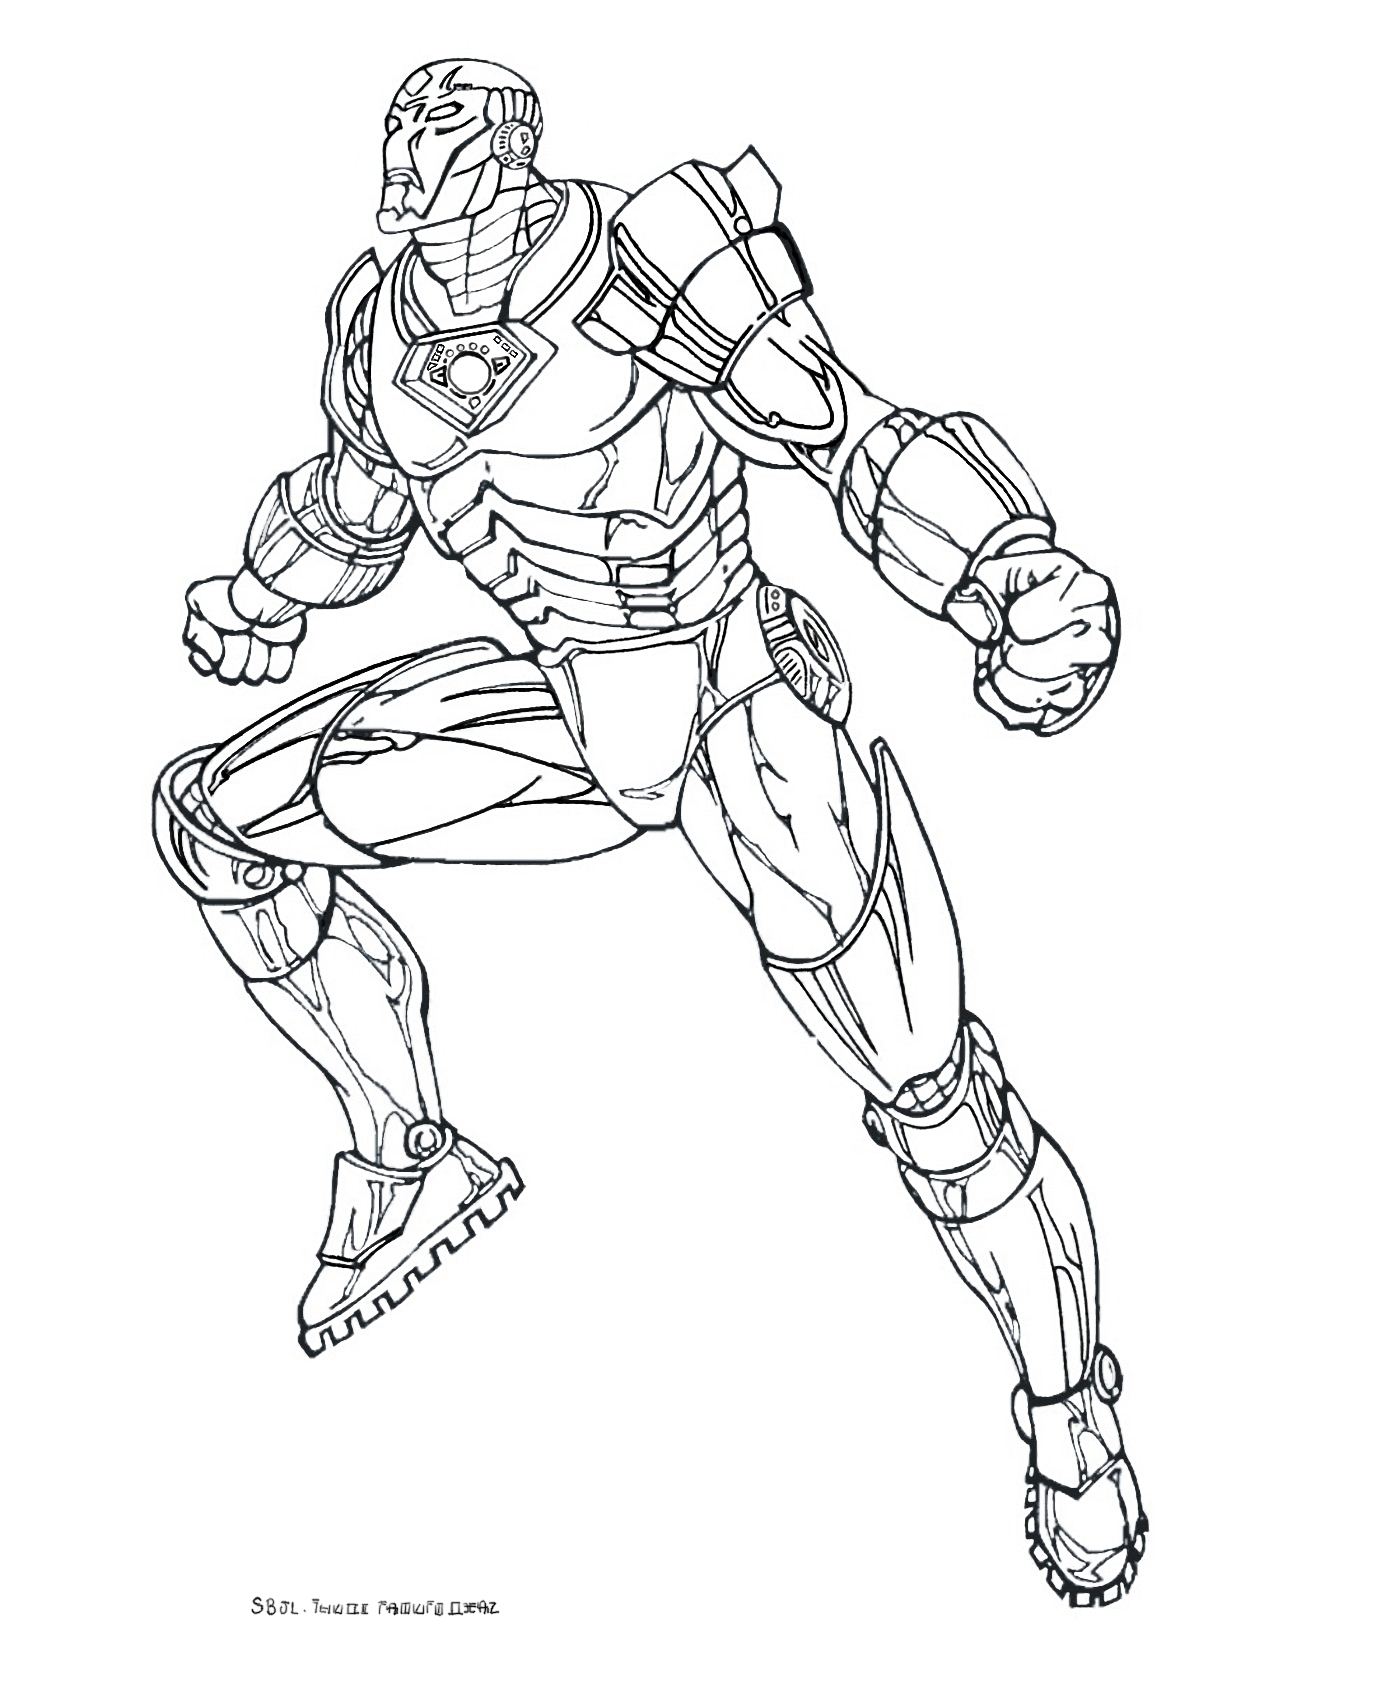 Iron man to color for children - Iron Man Kids Coloring Pages